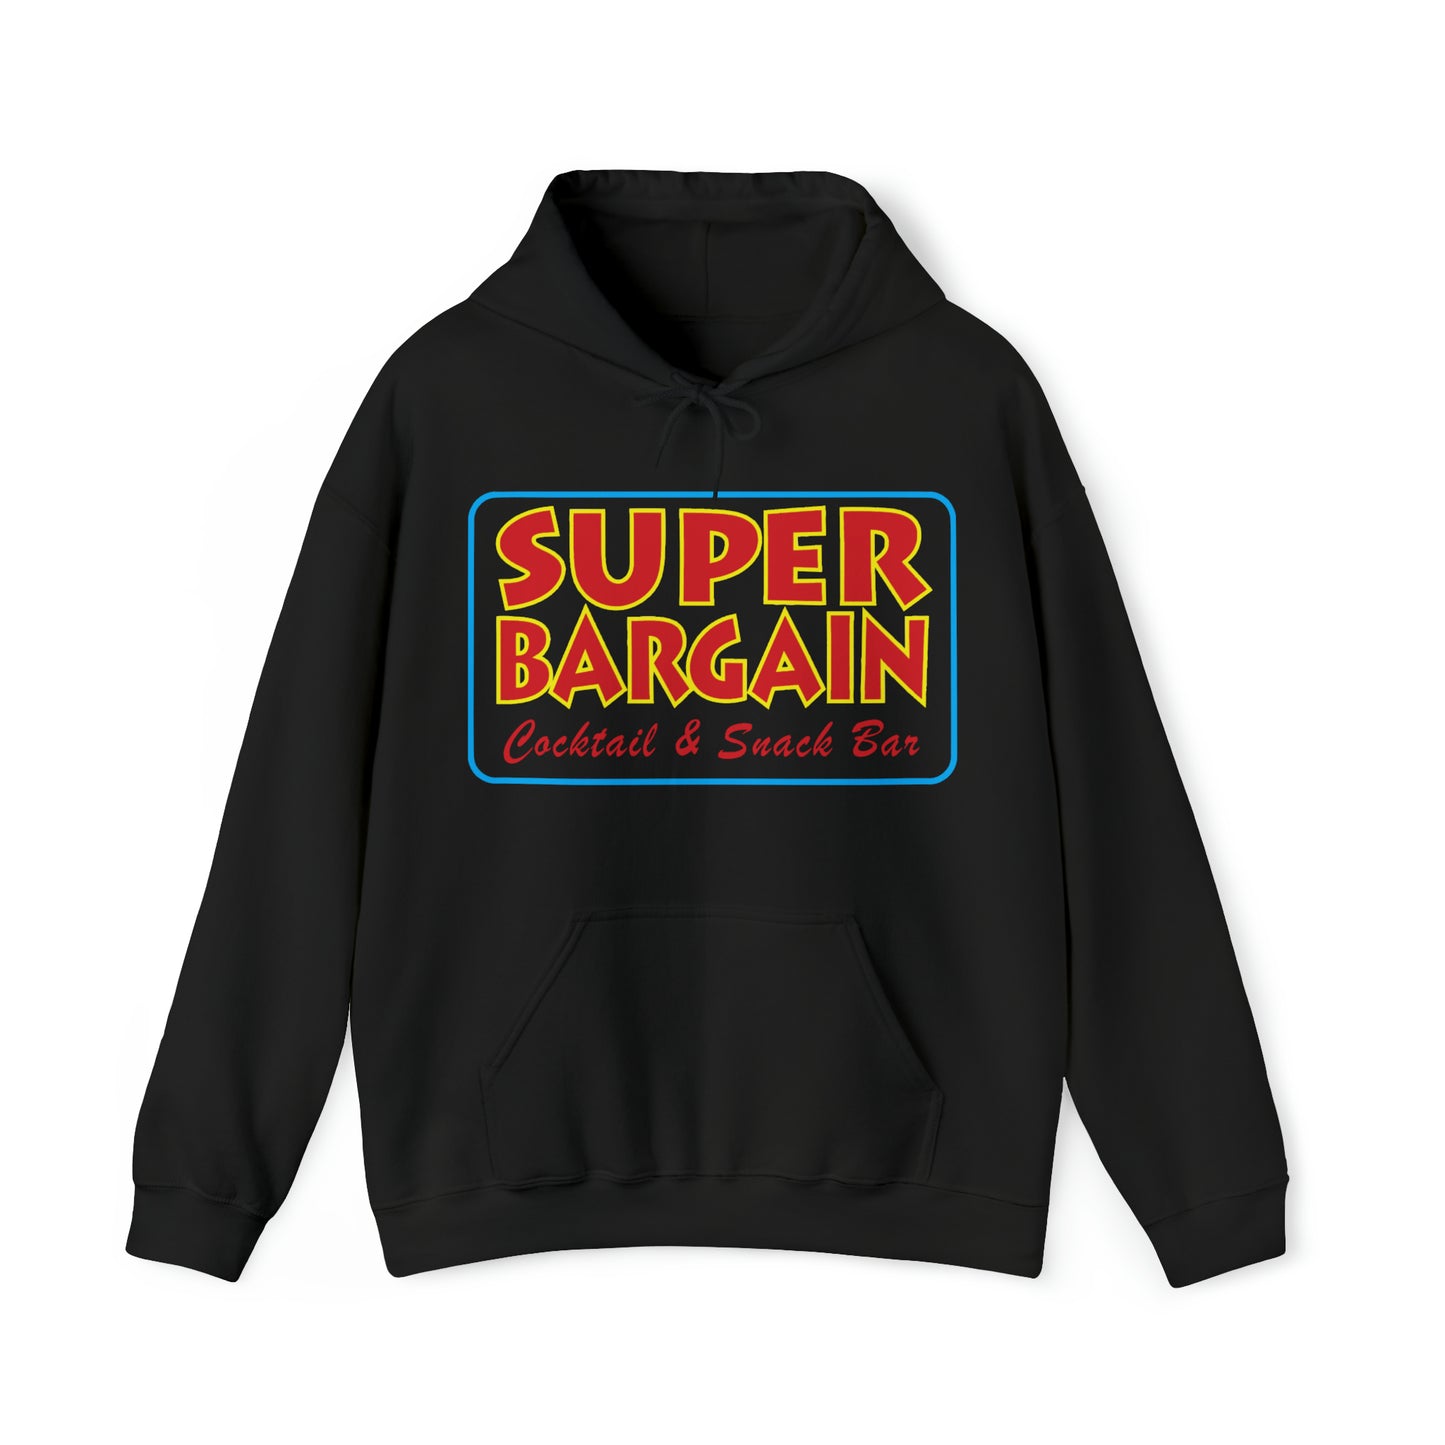 Black Unisex Heavy Blend™ Hooded Sweatshirt with a colorful design featuring the text "SUPER BARGAIN Cocktail & Snack Bar" in retro style on the front, showcasing Toronto's Cabbagetown flair by Printify.